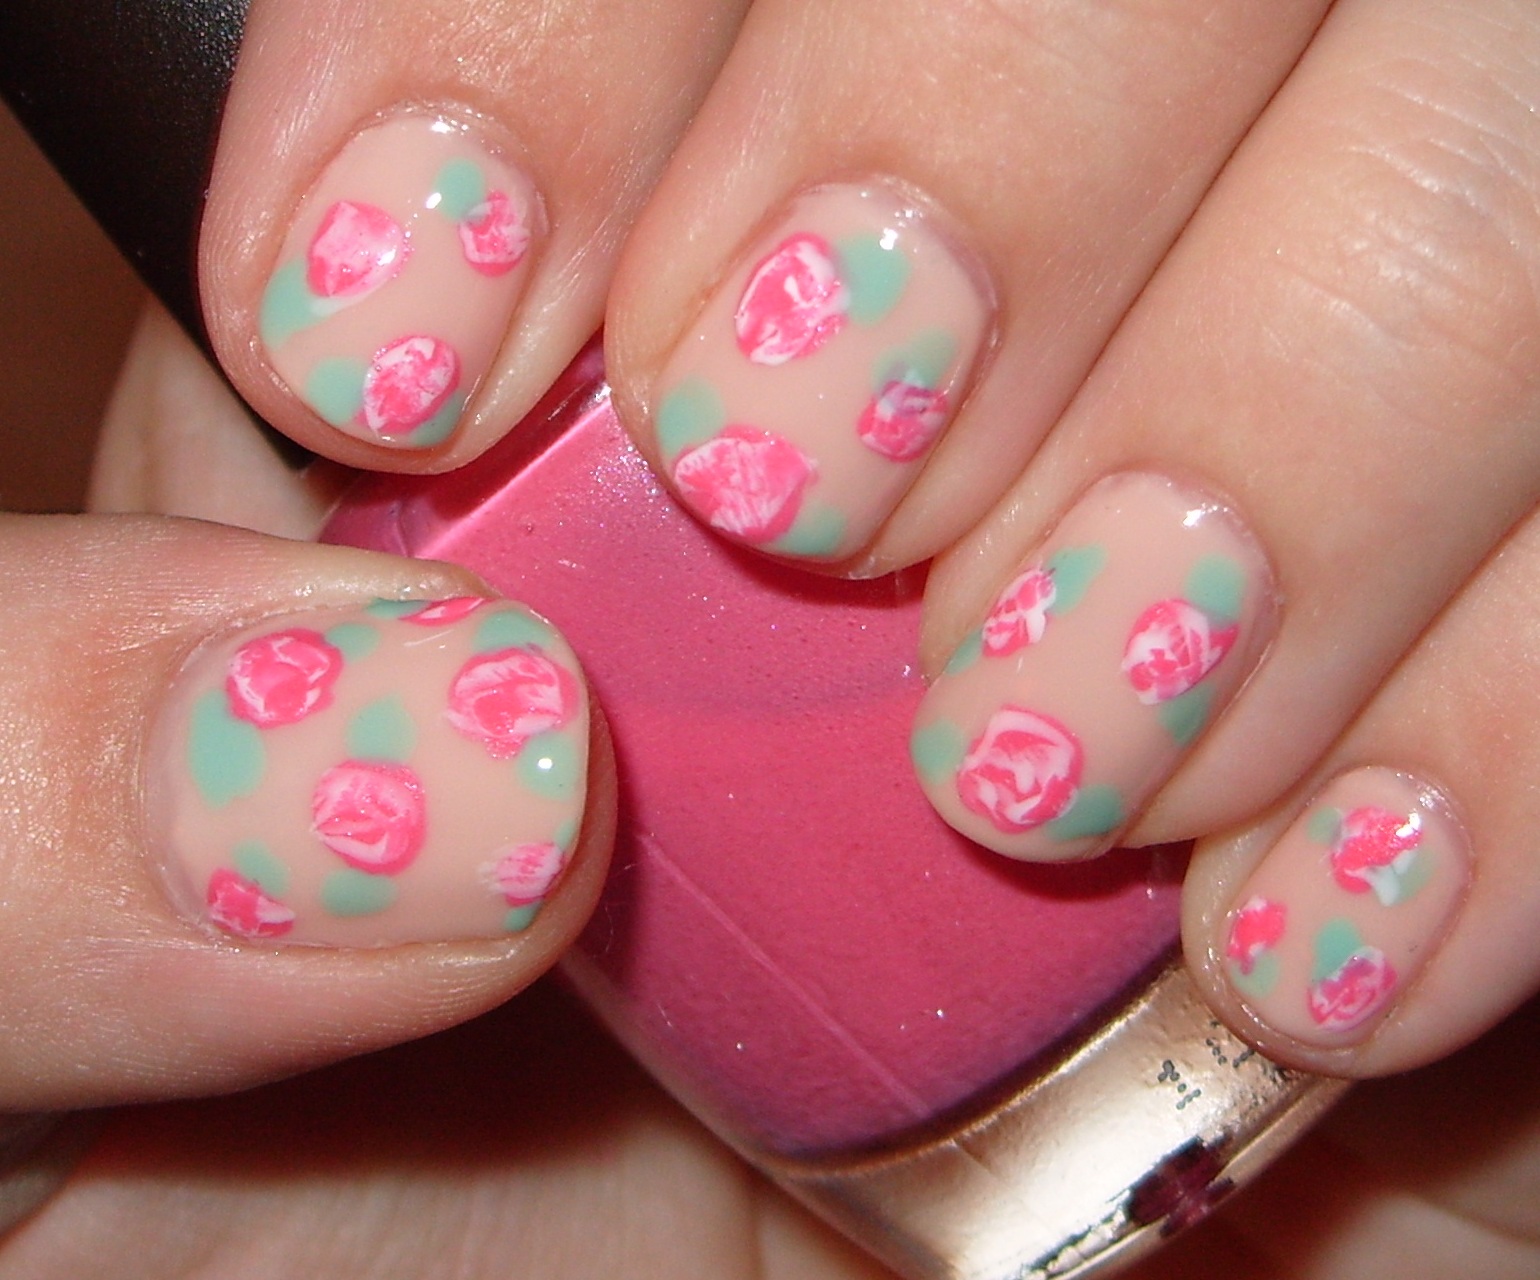 2. Rose Nail Art on French Tips - wide 4